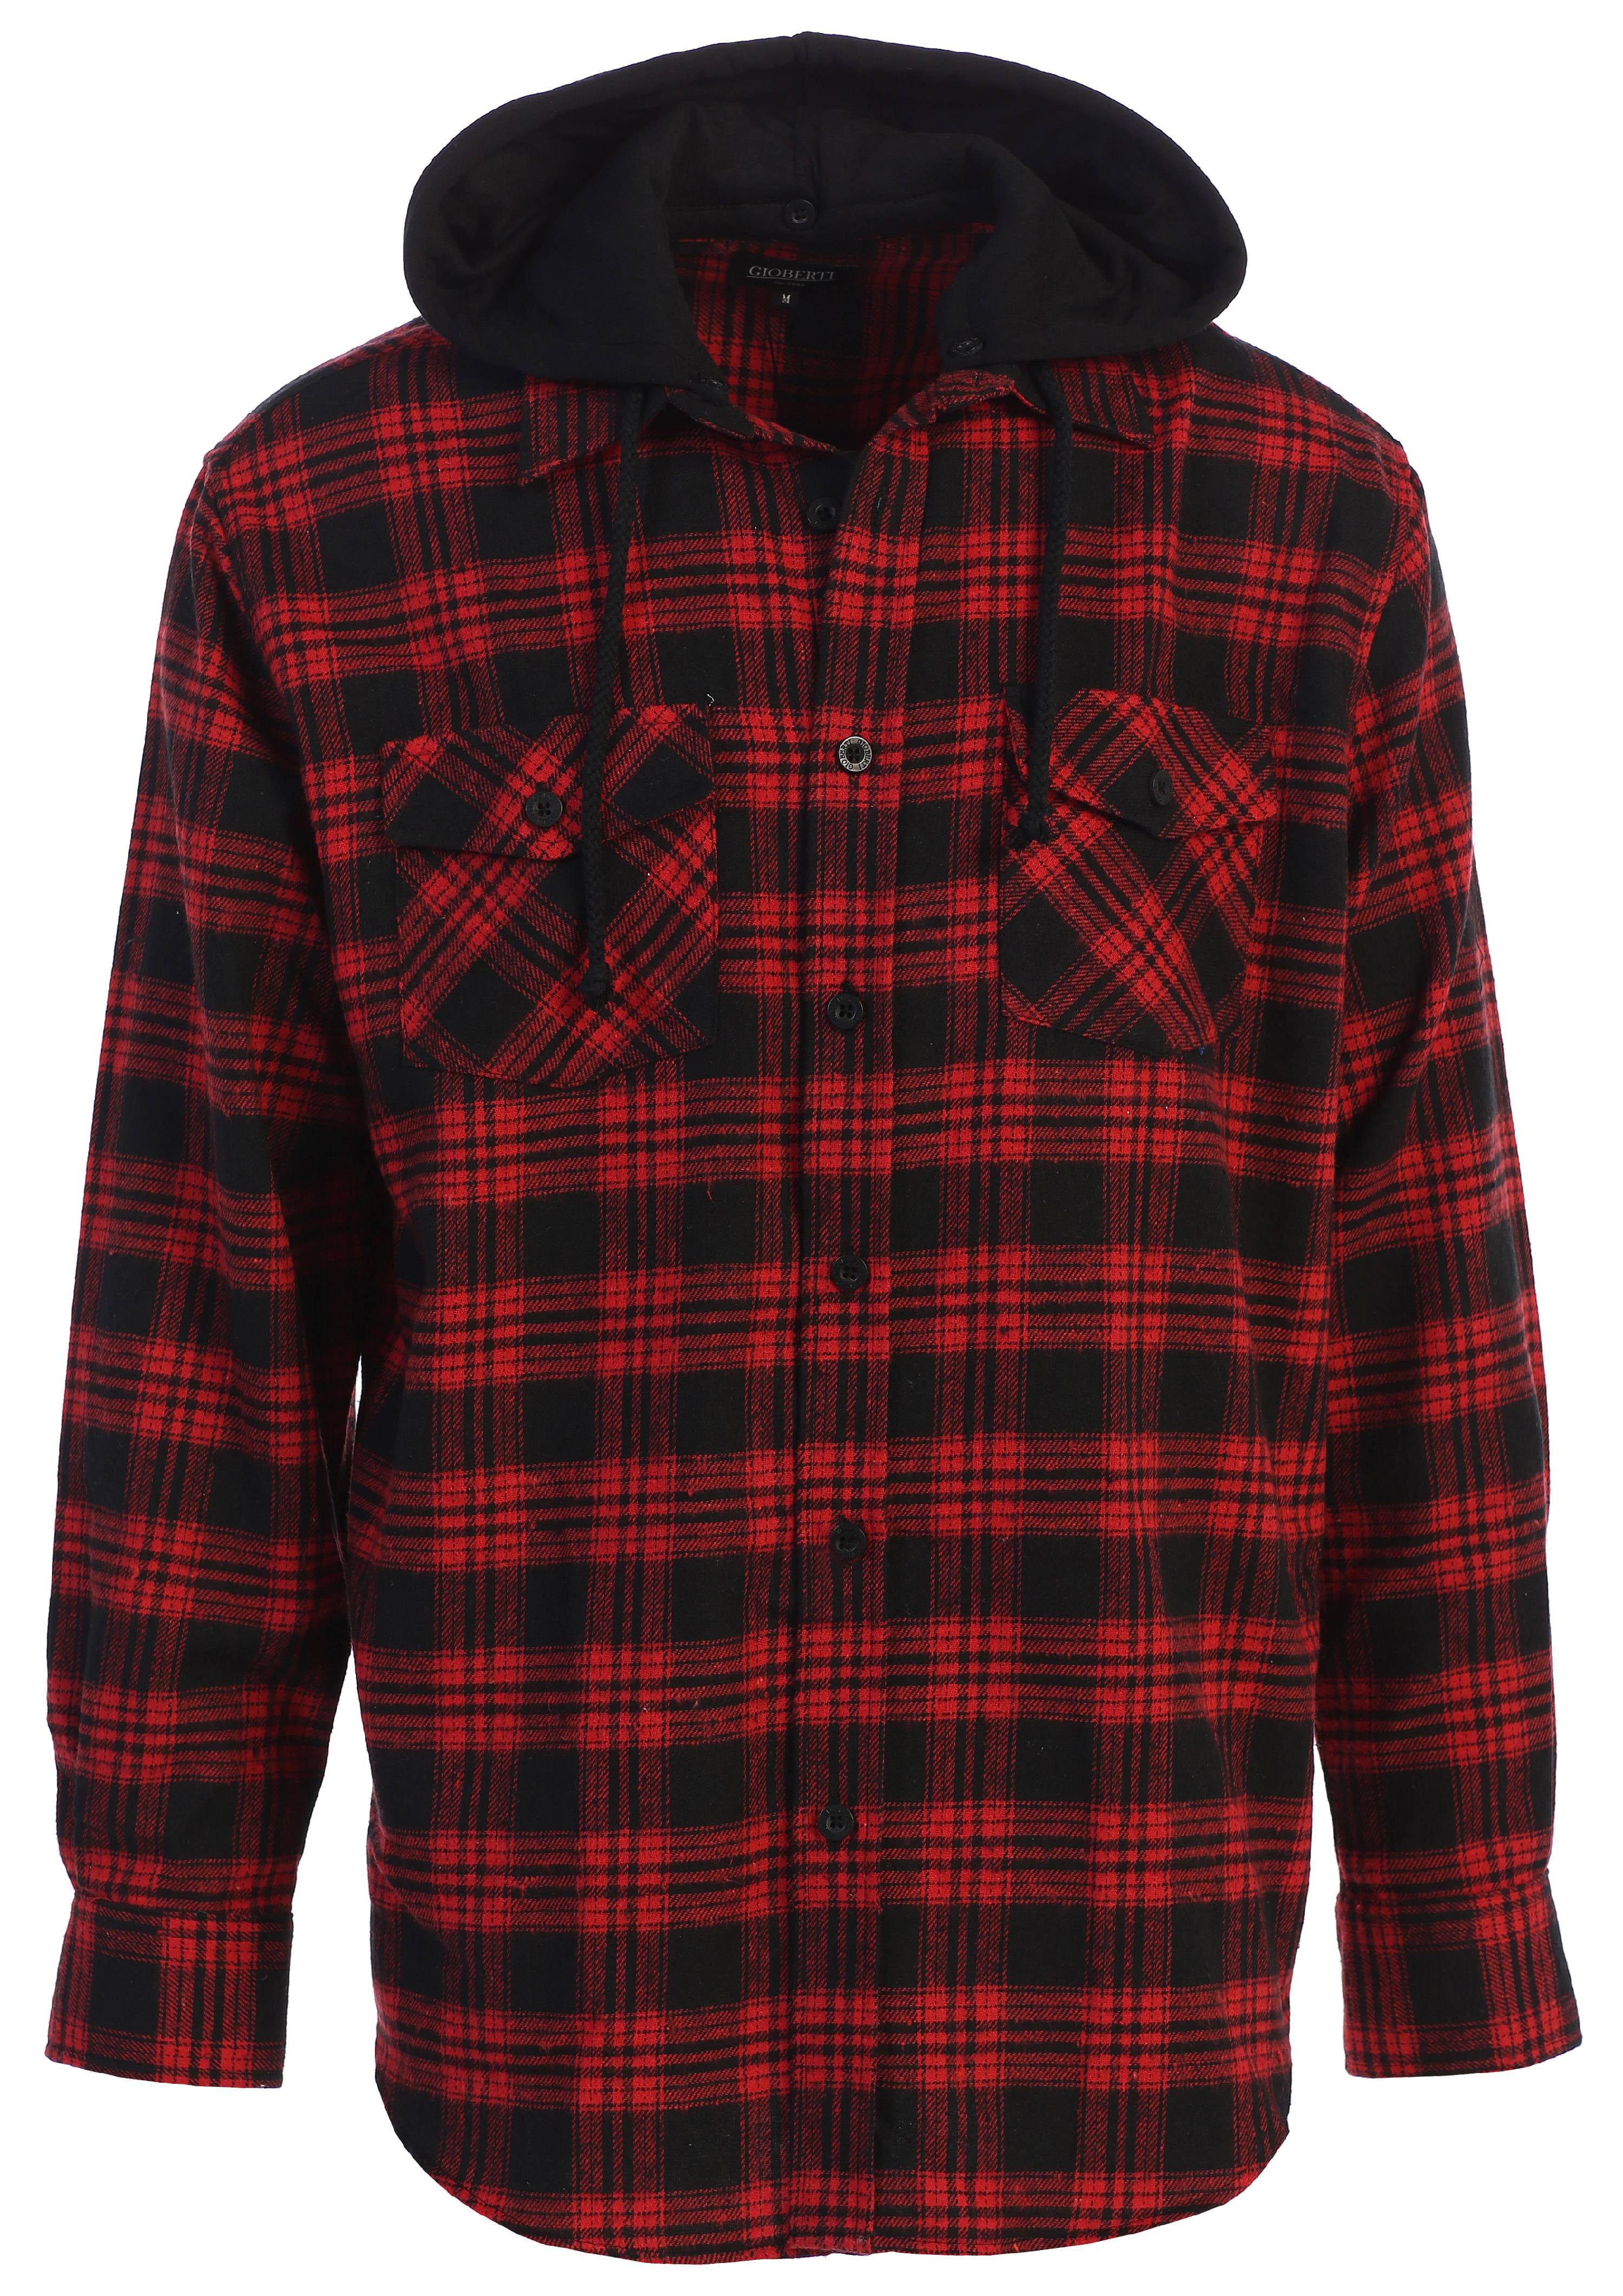 WSPLYSPJY Mens Hoodie Long Sleeve Button Down Plaid Shirt Front Pockets 